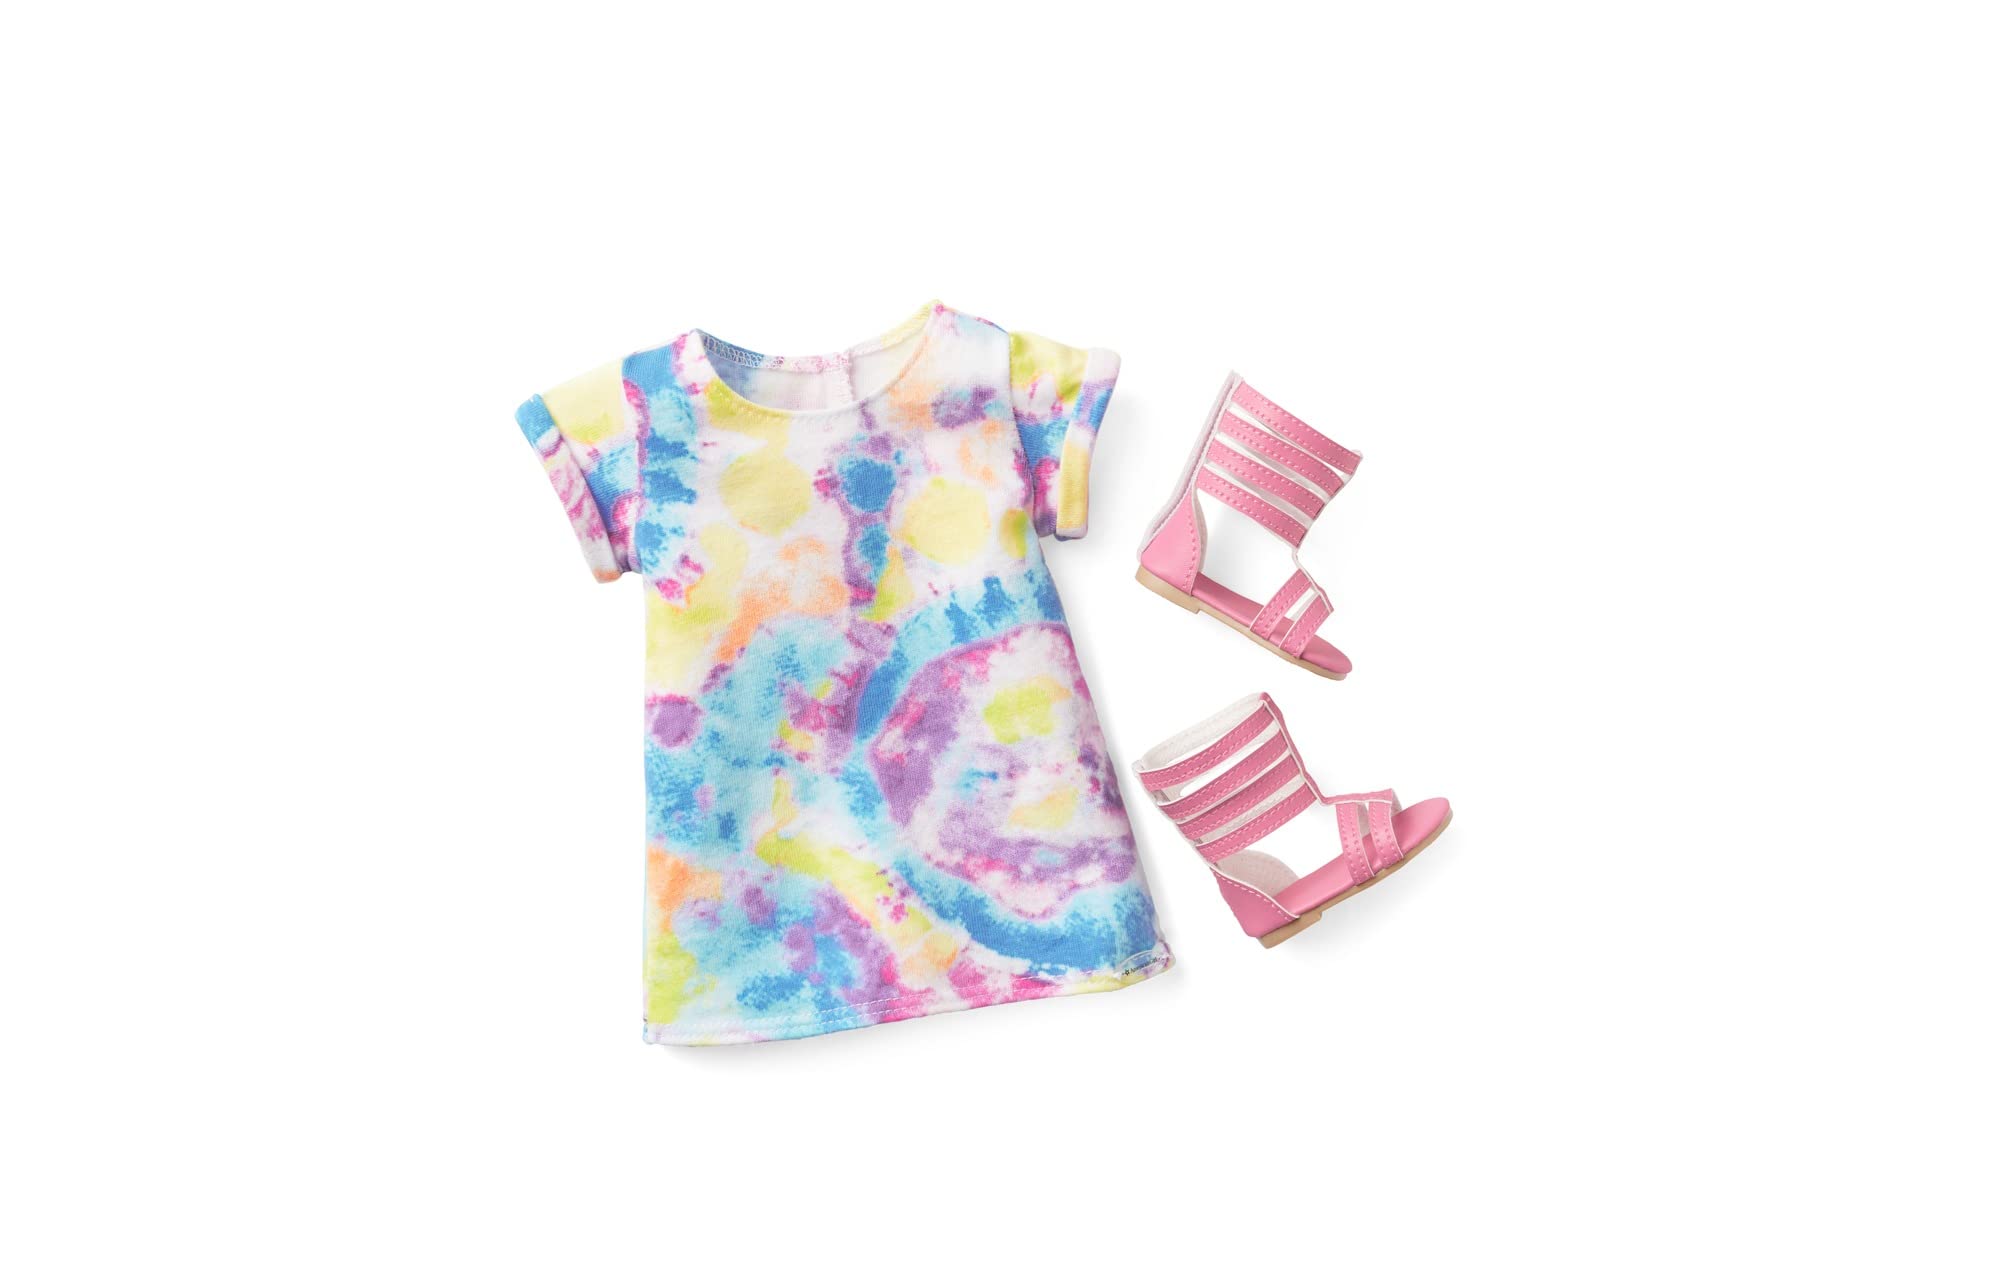 American Girl Truly Me Show Your Artsy Side Outfit for 18-inch Dolls with Tie Dye T-Shirt Dress